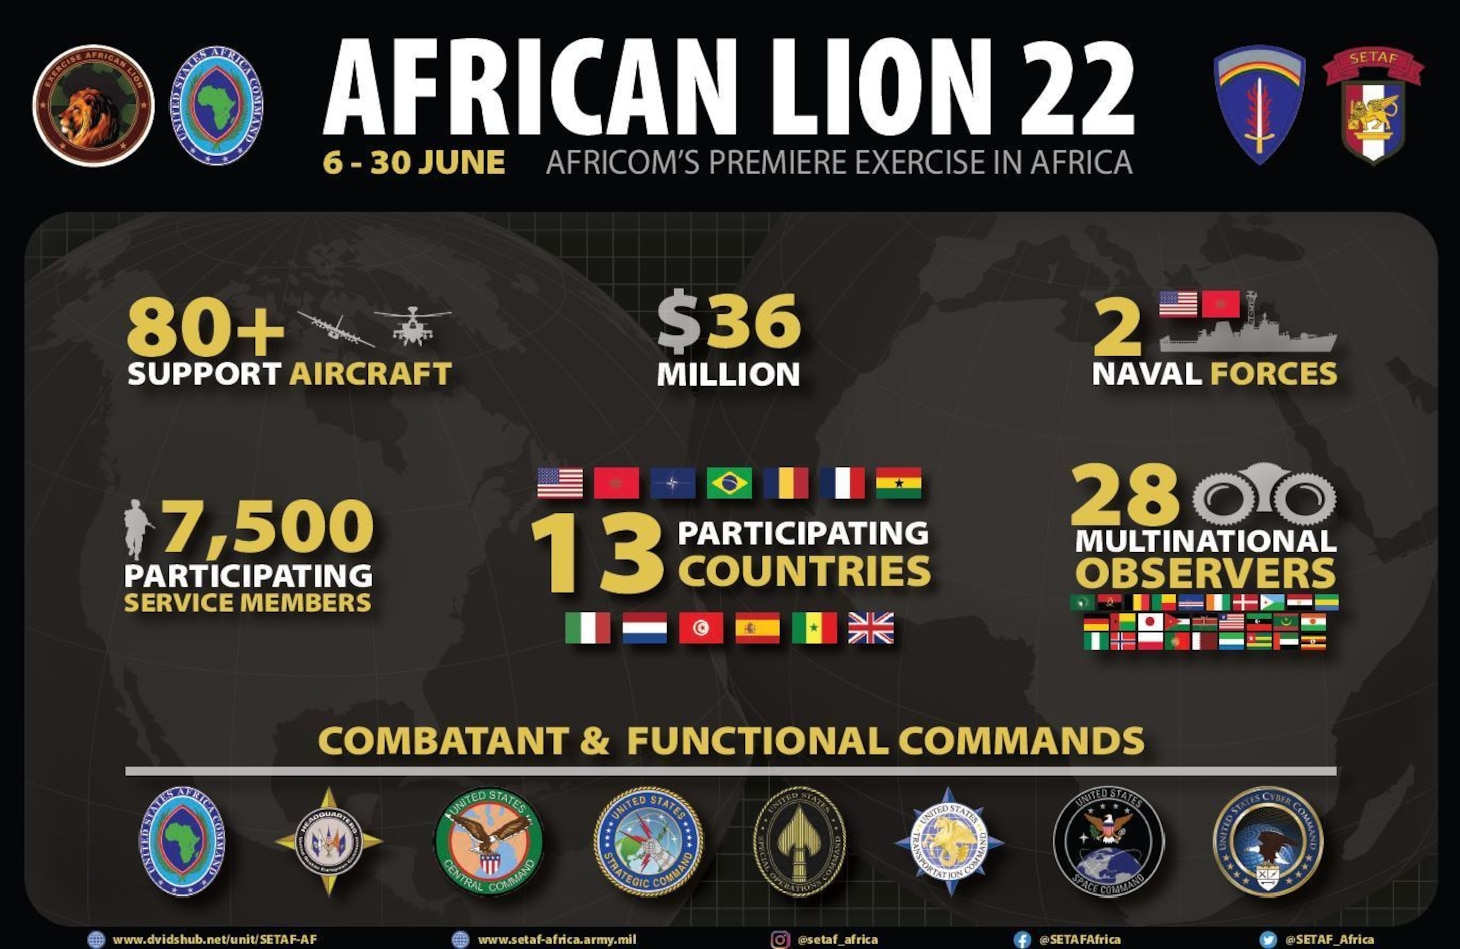 African Lion is U.S. Africa Command’s largest and premier annual exercise, involving more than 7,500 service members from June 6 - 30.